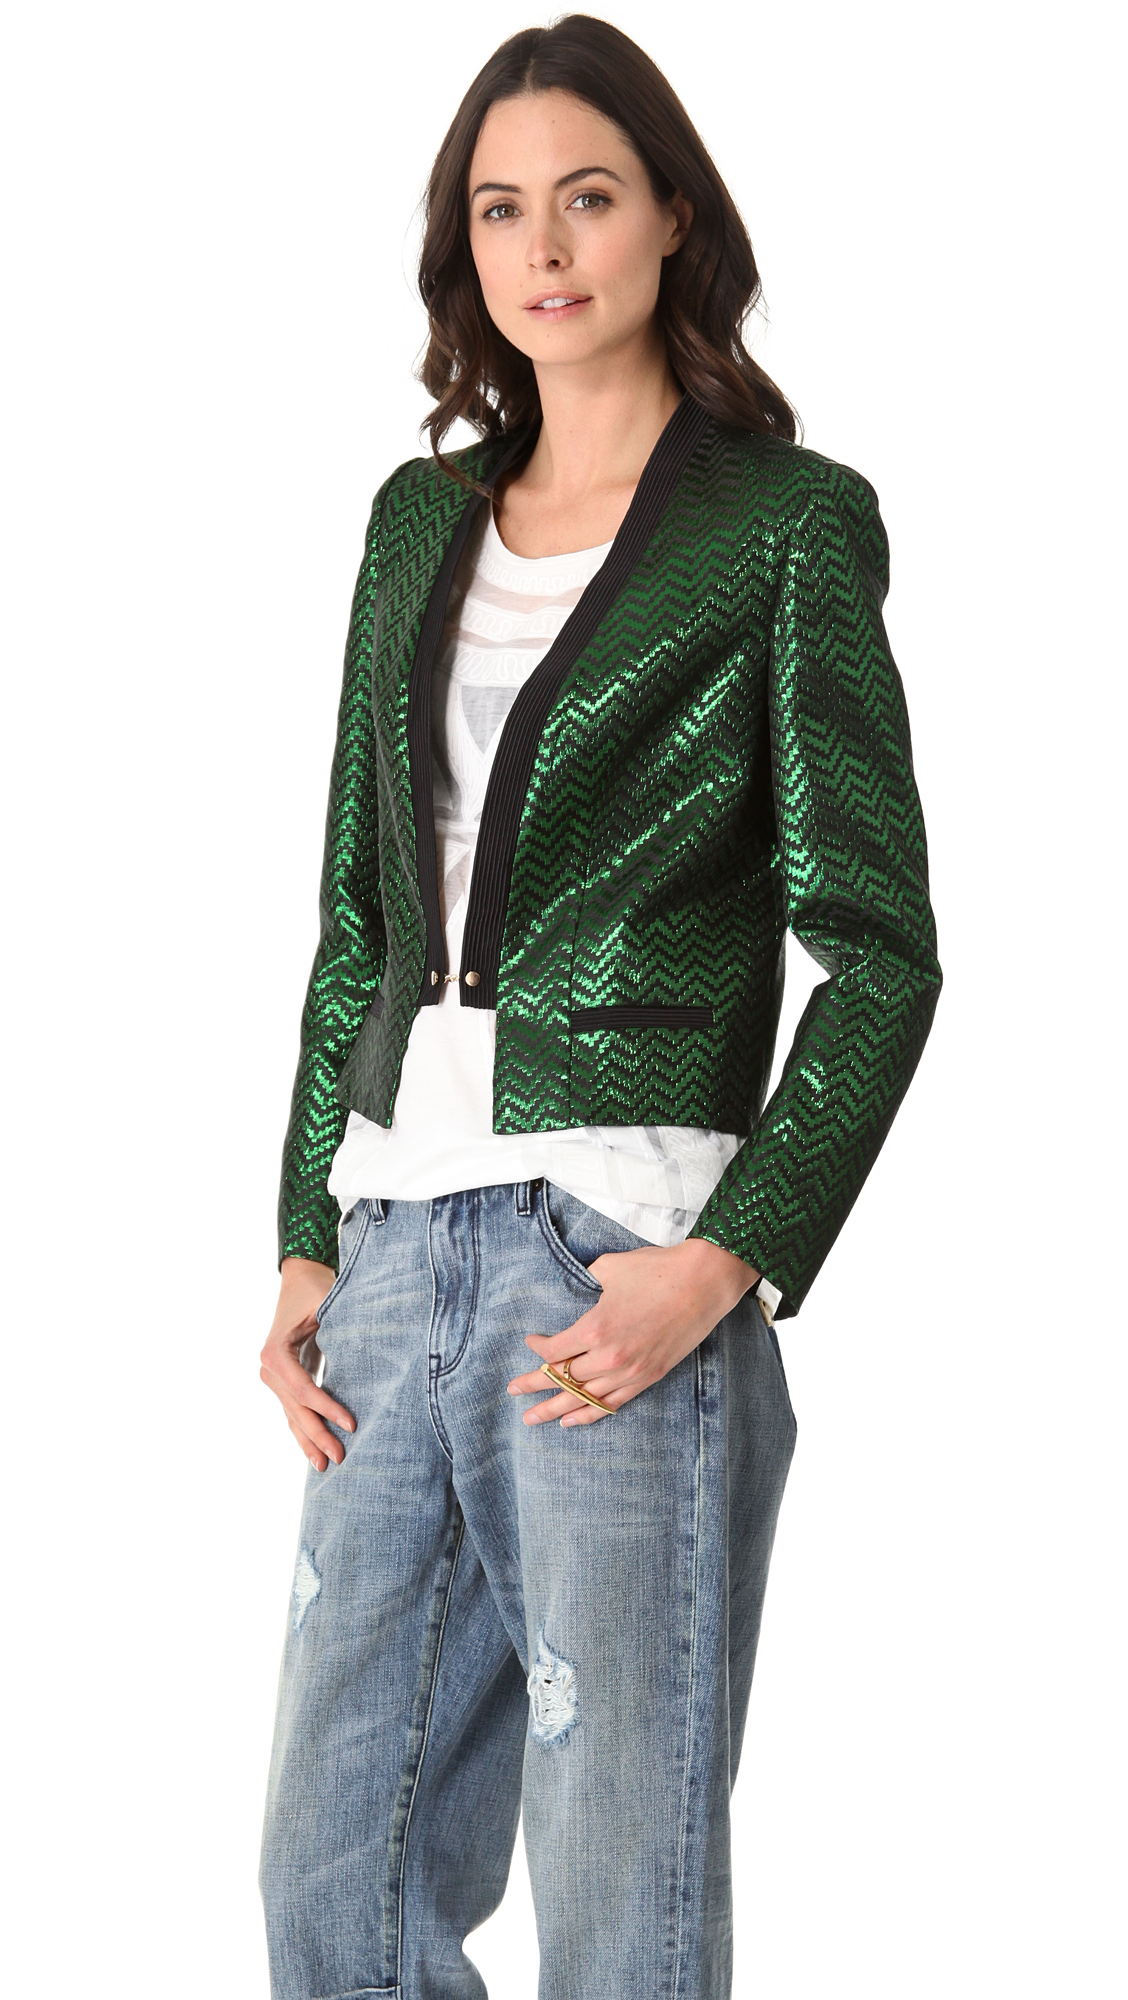 Lyst - Sass & Bide The Ruler Jacket in Green